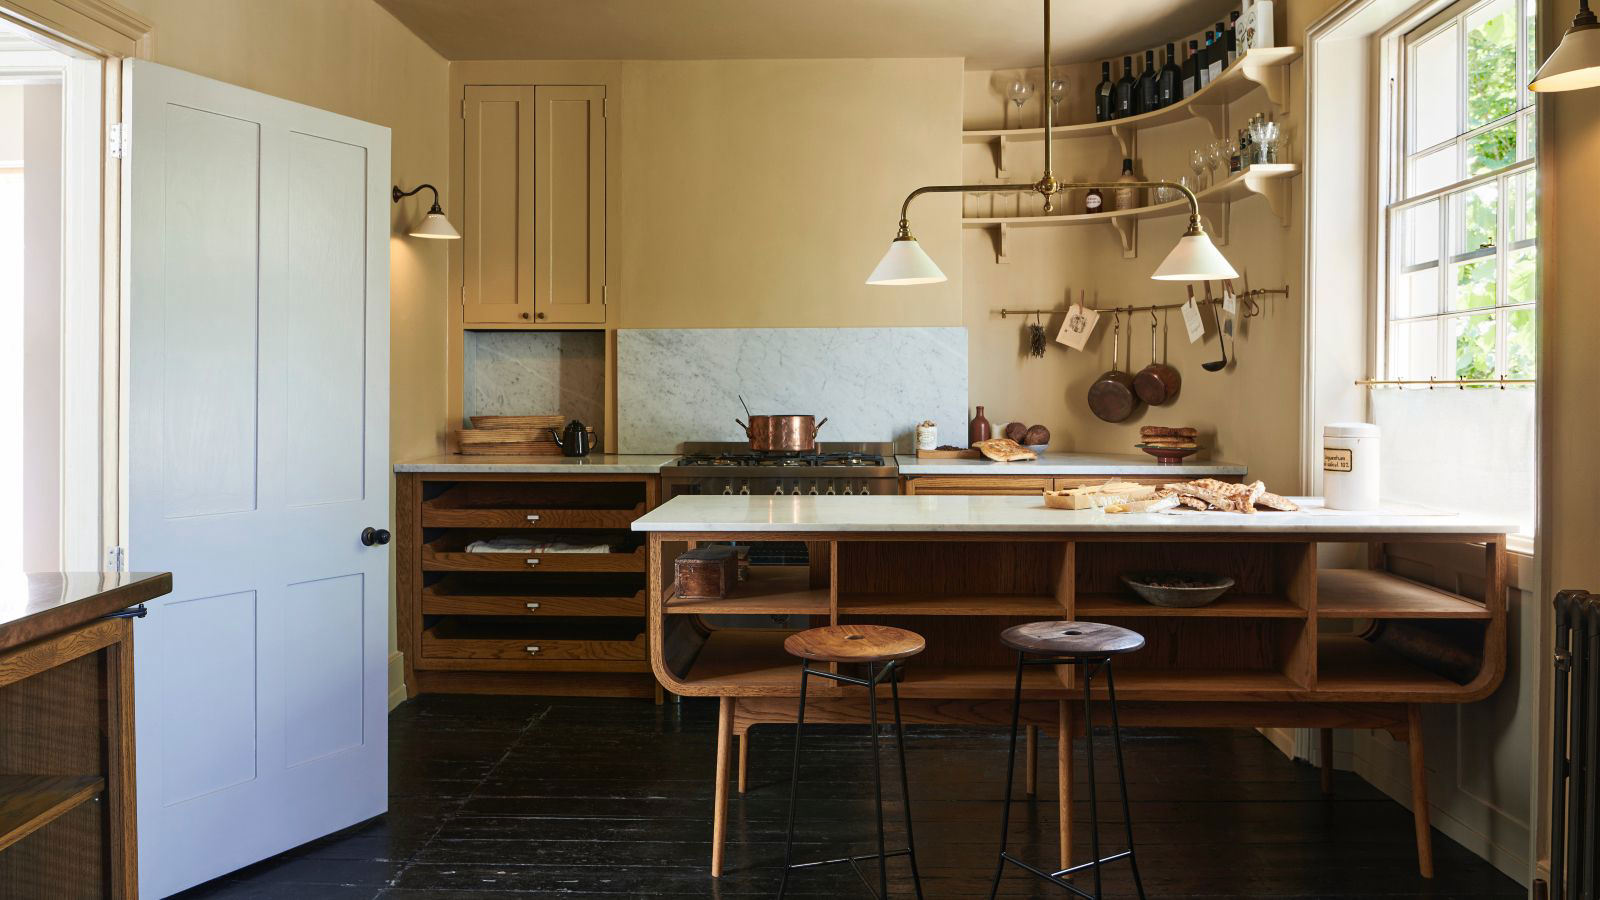 Can you fit an island into a galley kitchen? Interior design experts ...